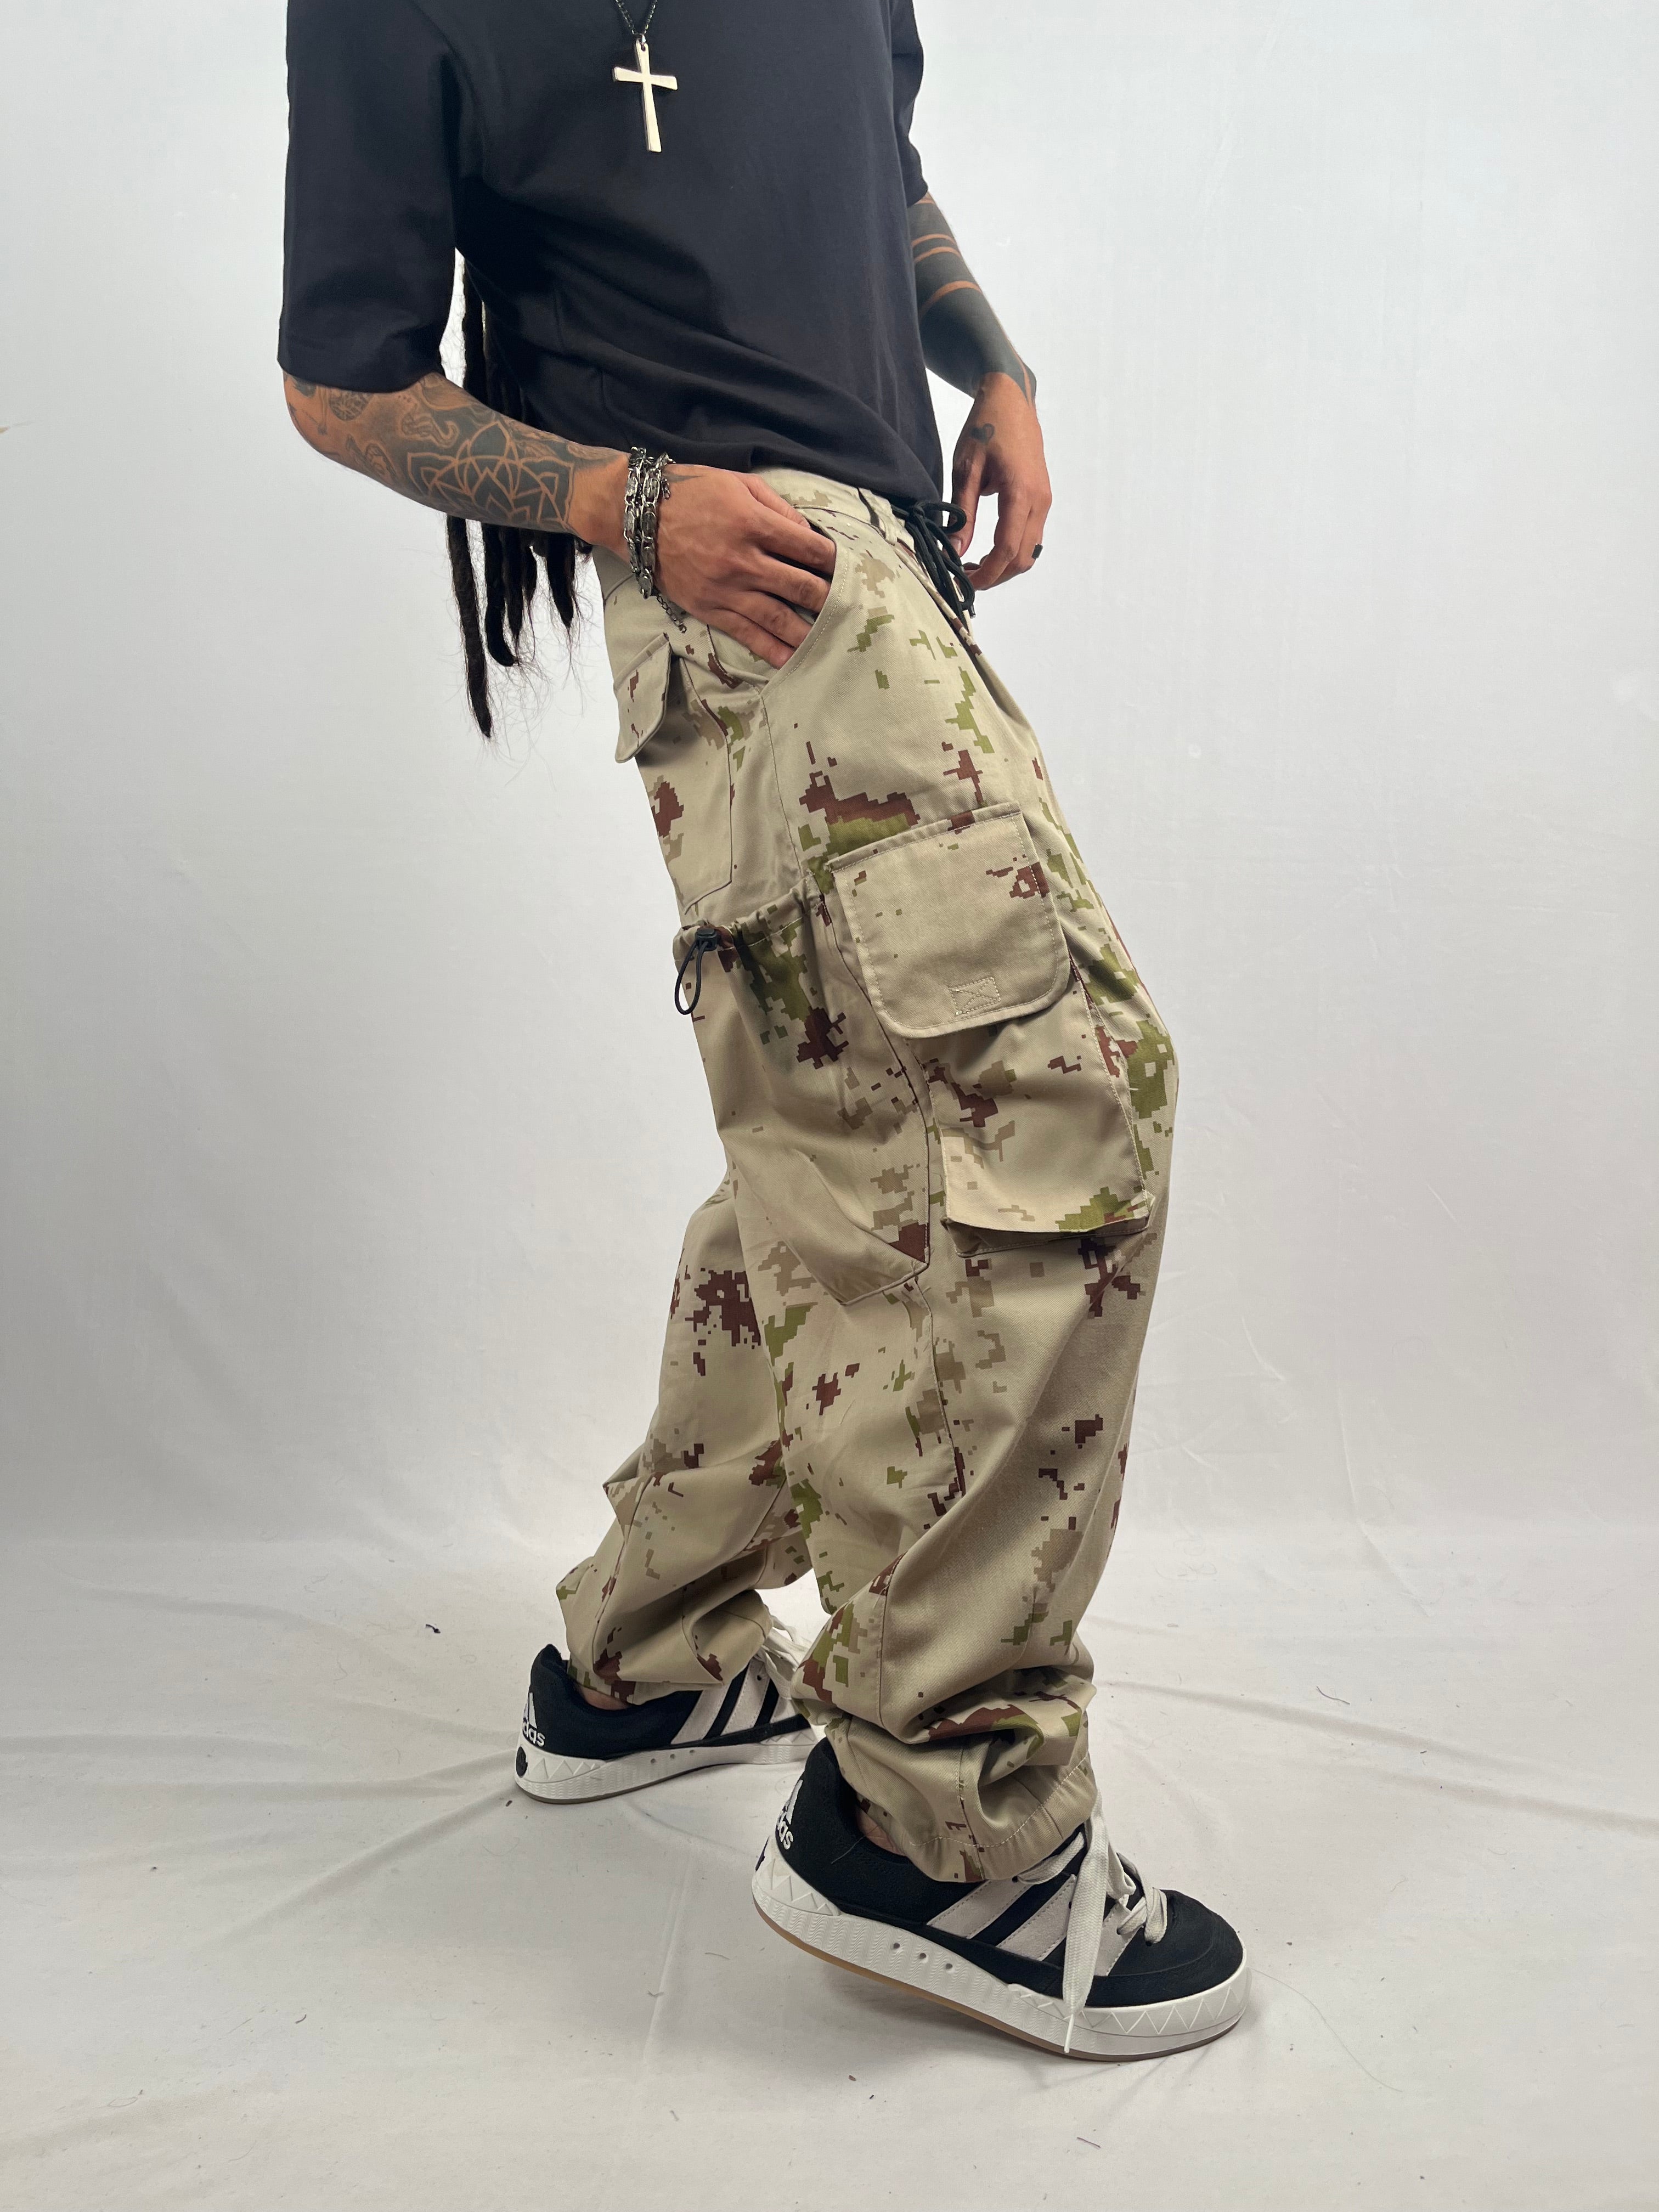 Camouflage Cargo Trousers - Buy Camouflage Cargo Trousers online in India